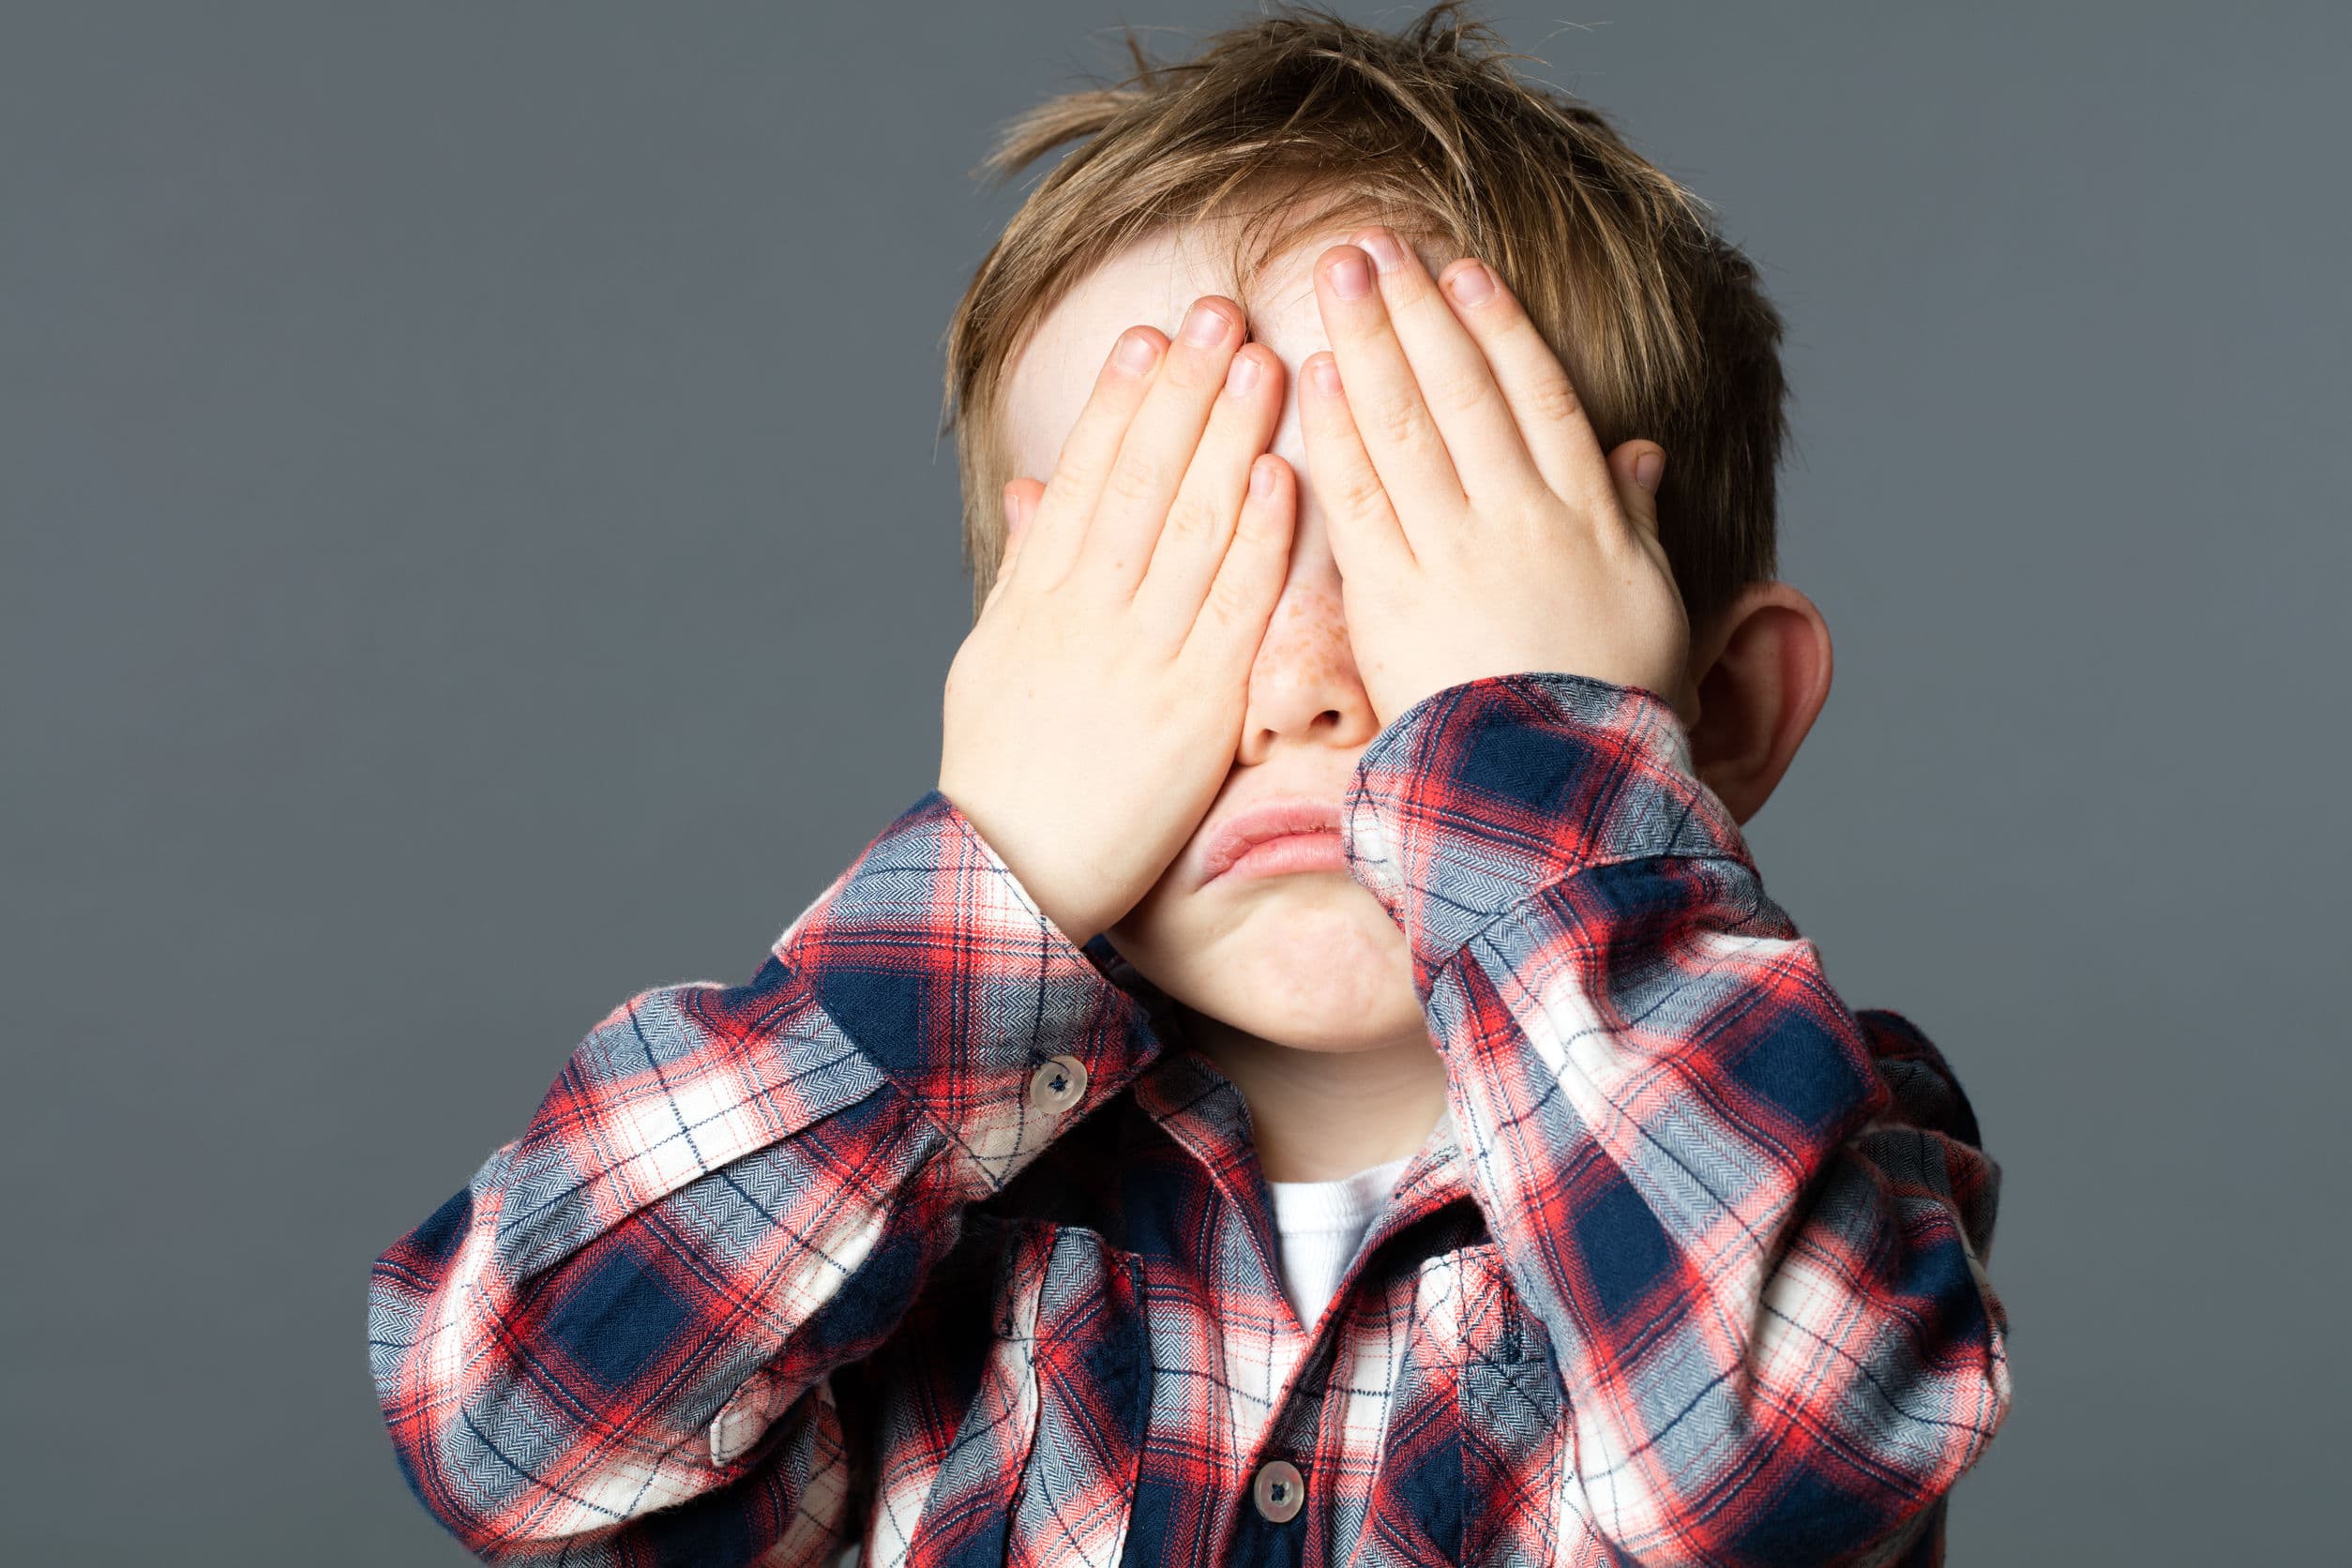 young child covering his eyes playing peekaboo